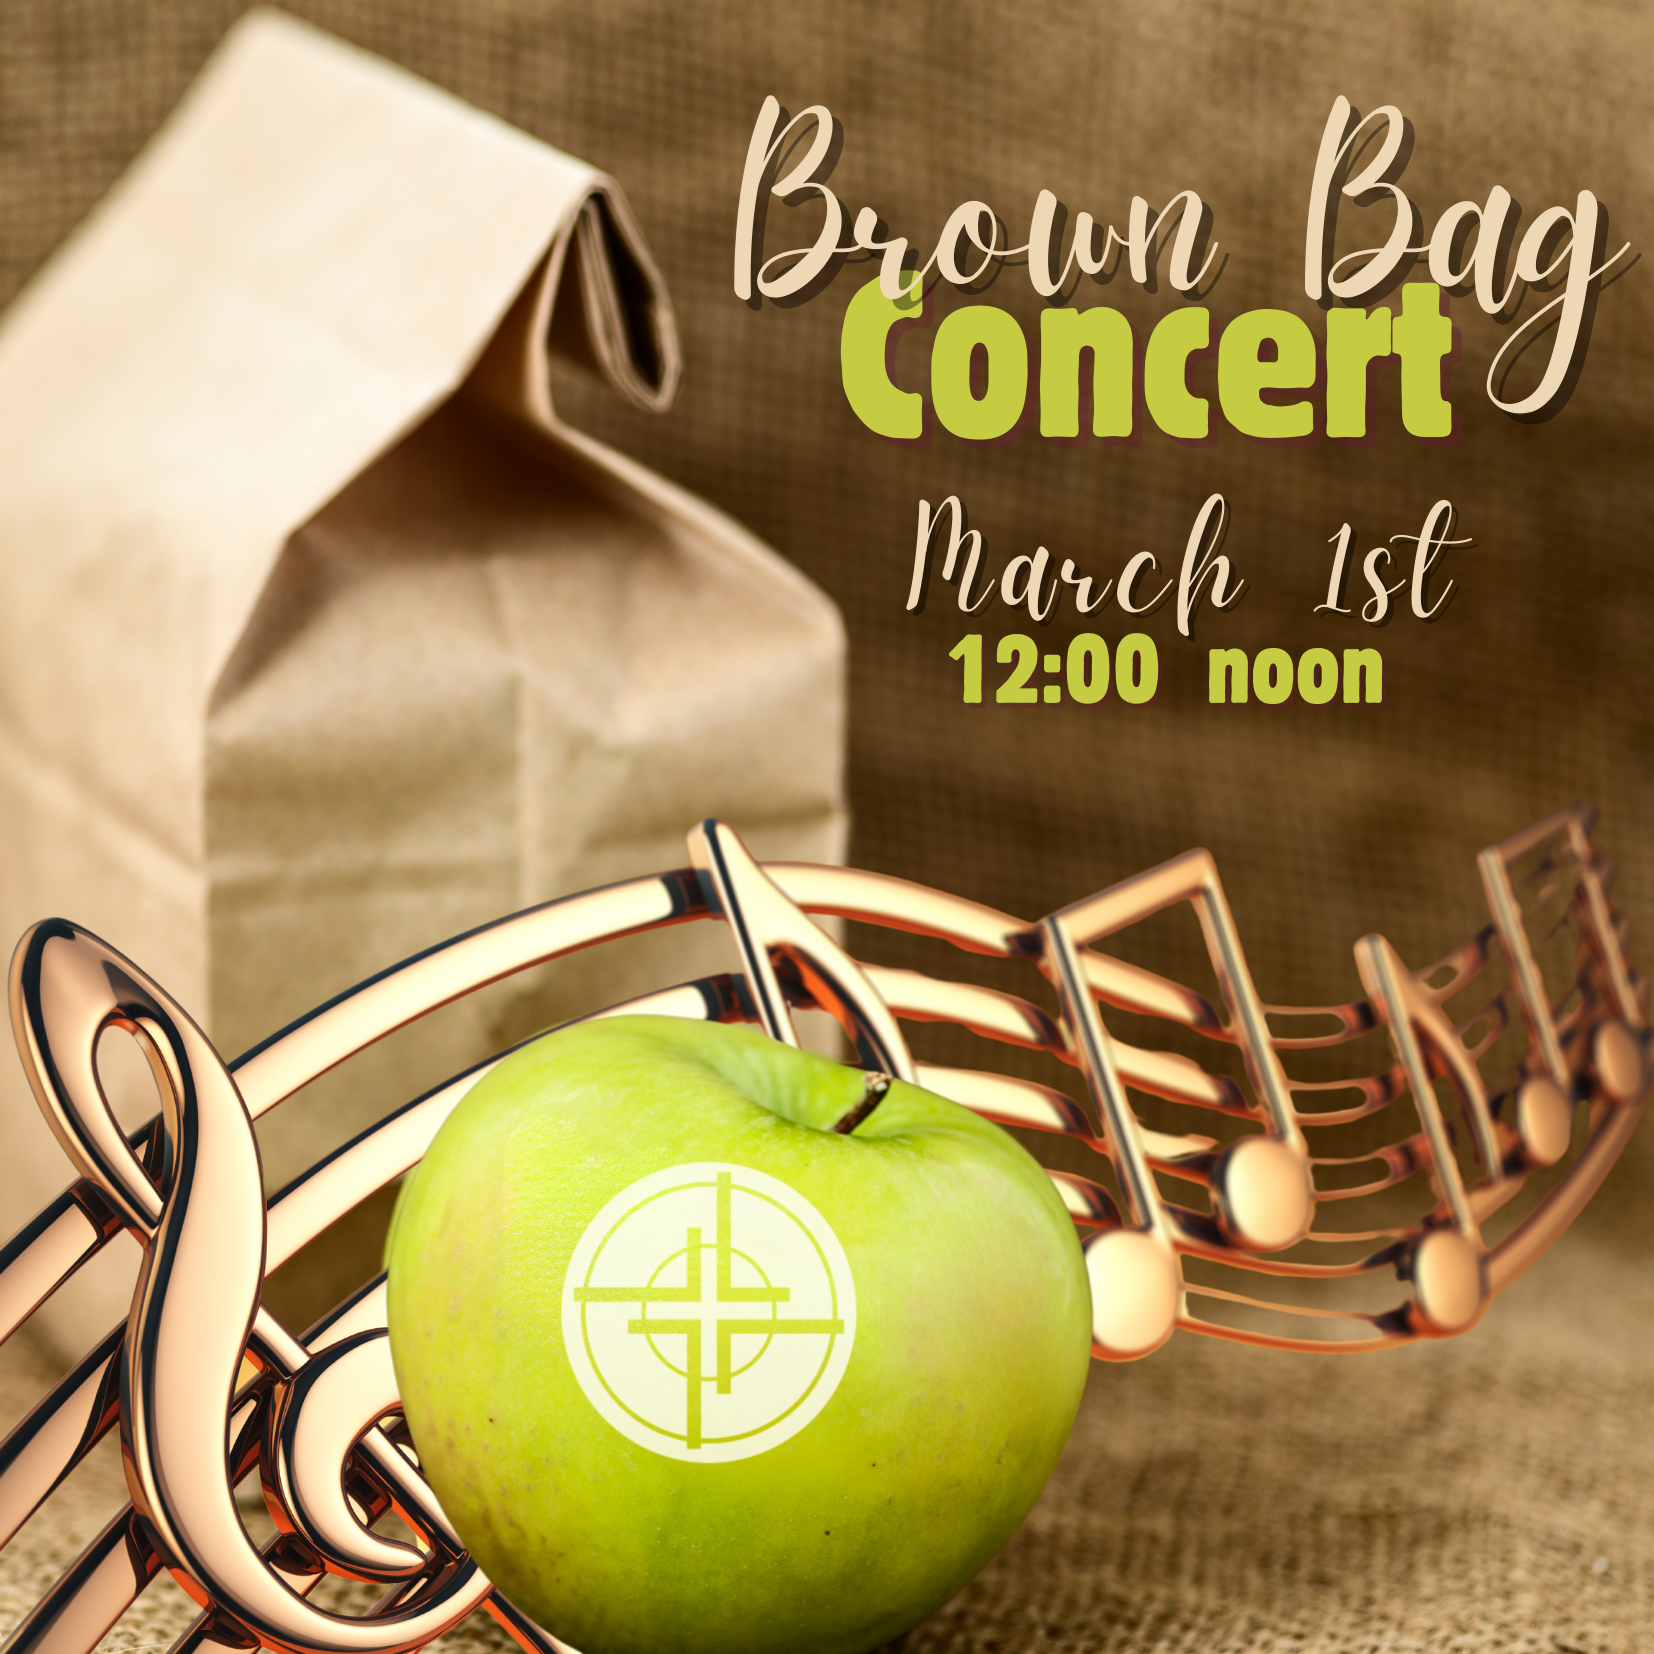 Brown Bag Concert at Acton Congregational Church on March 1, 2024 at 12 noon